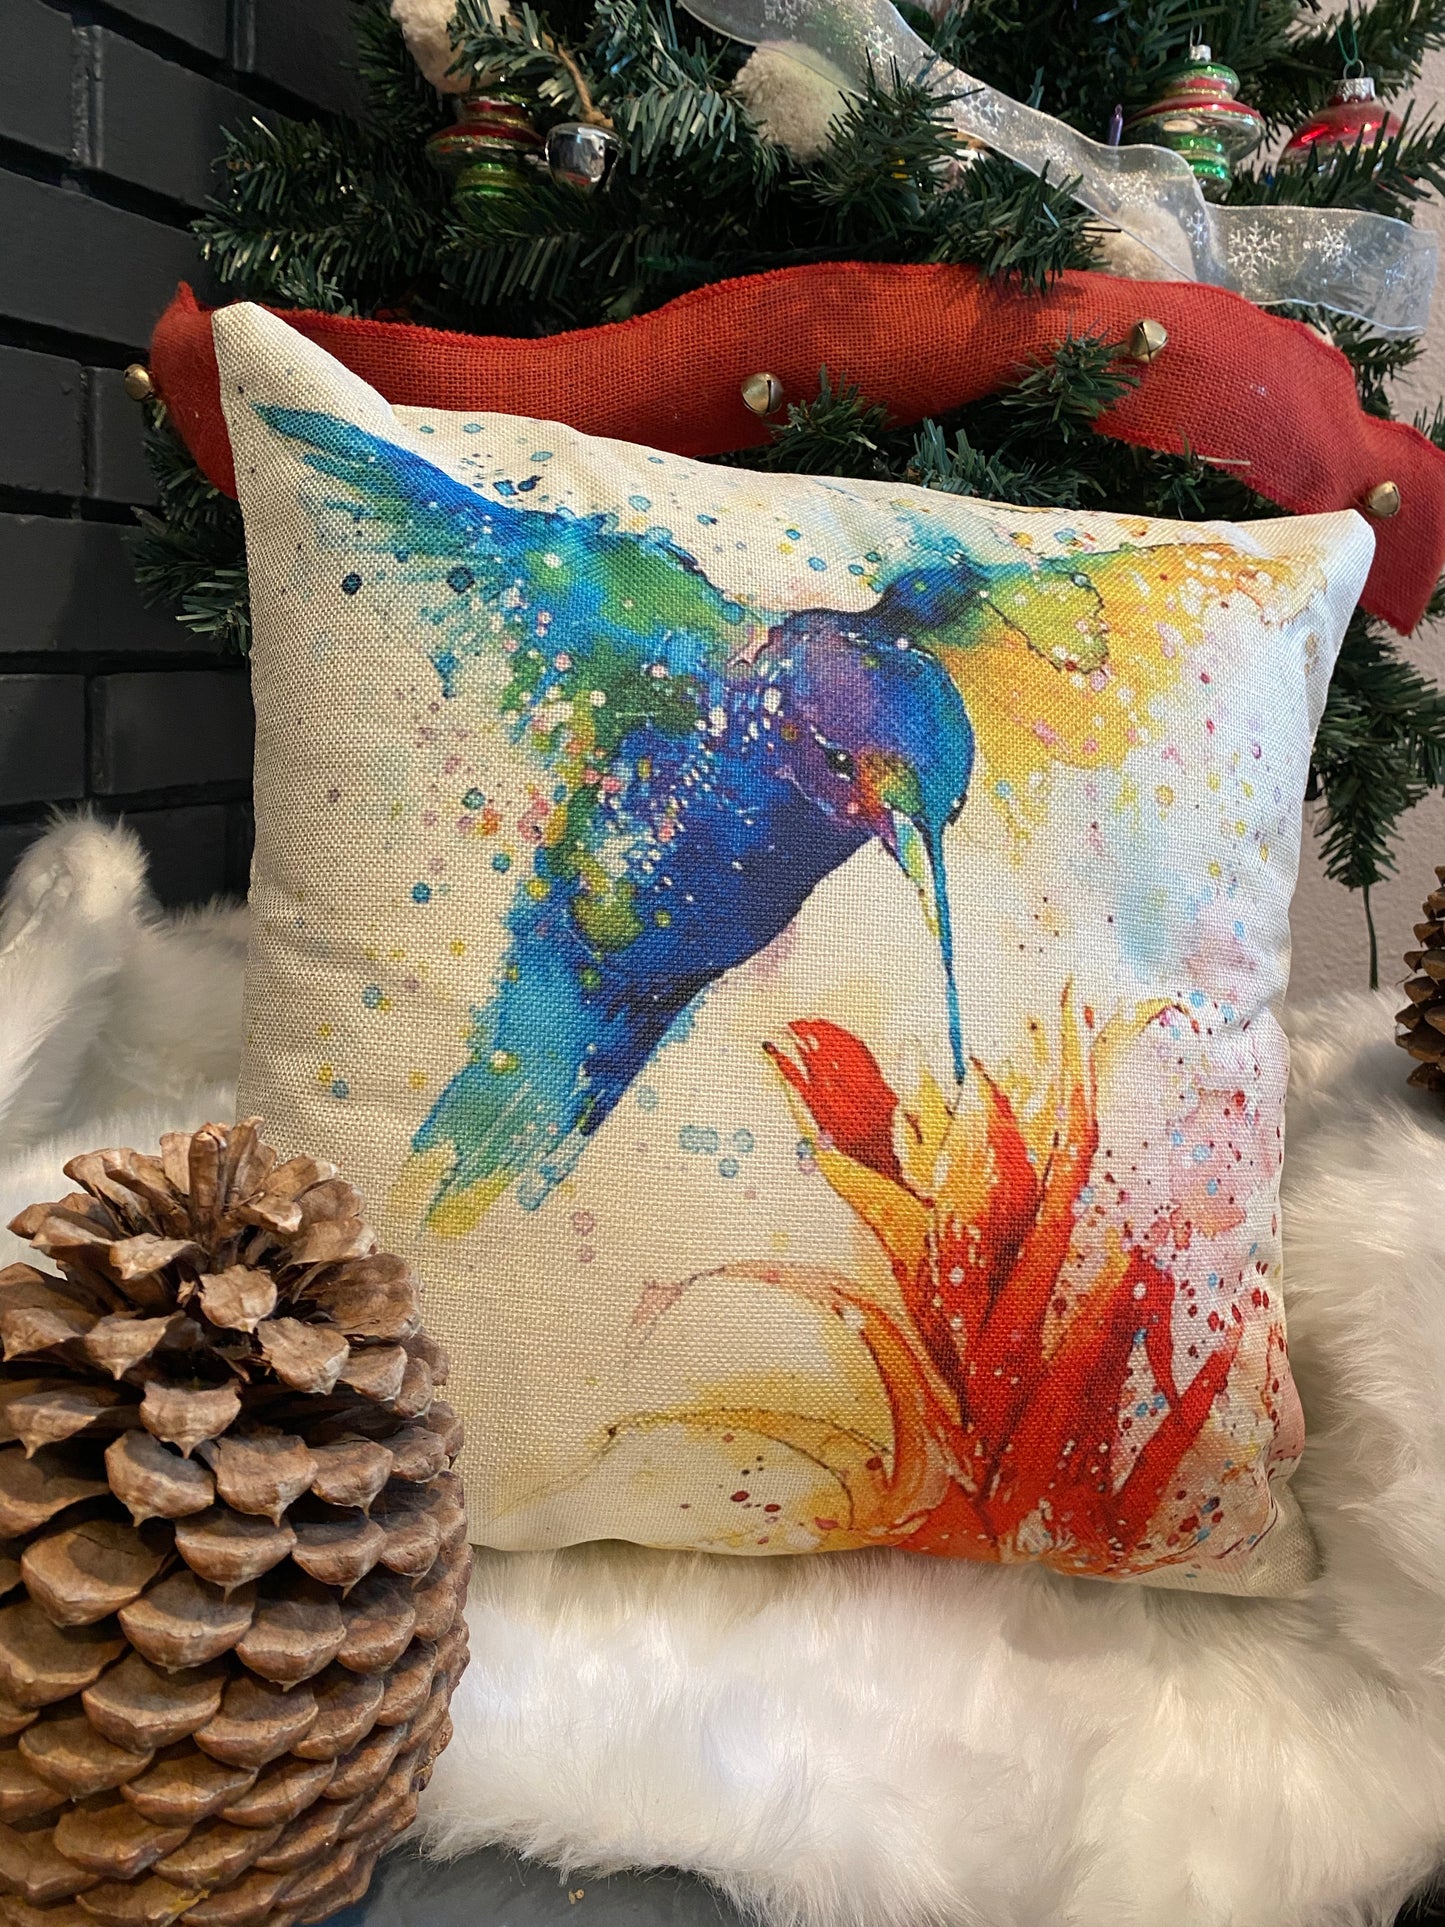 Oil Painting Blue Humming Birds With Flowers Throw Pillow Cover